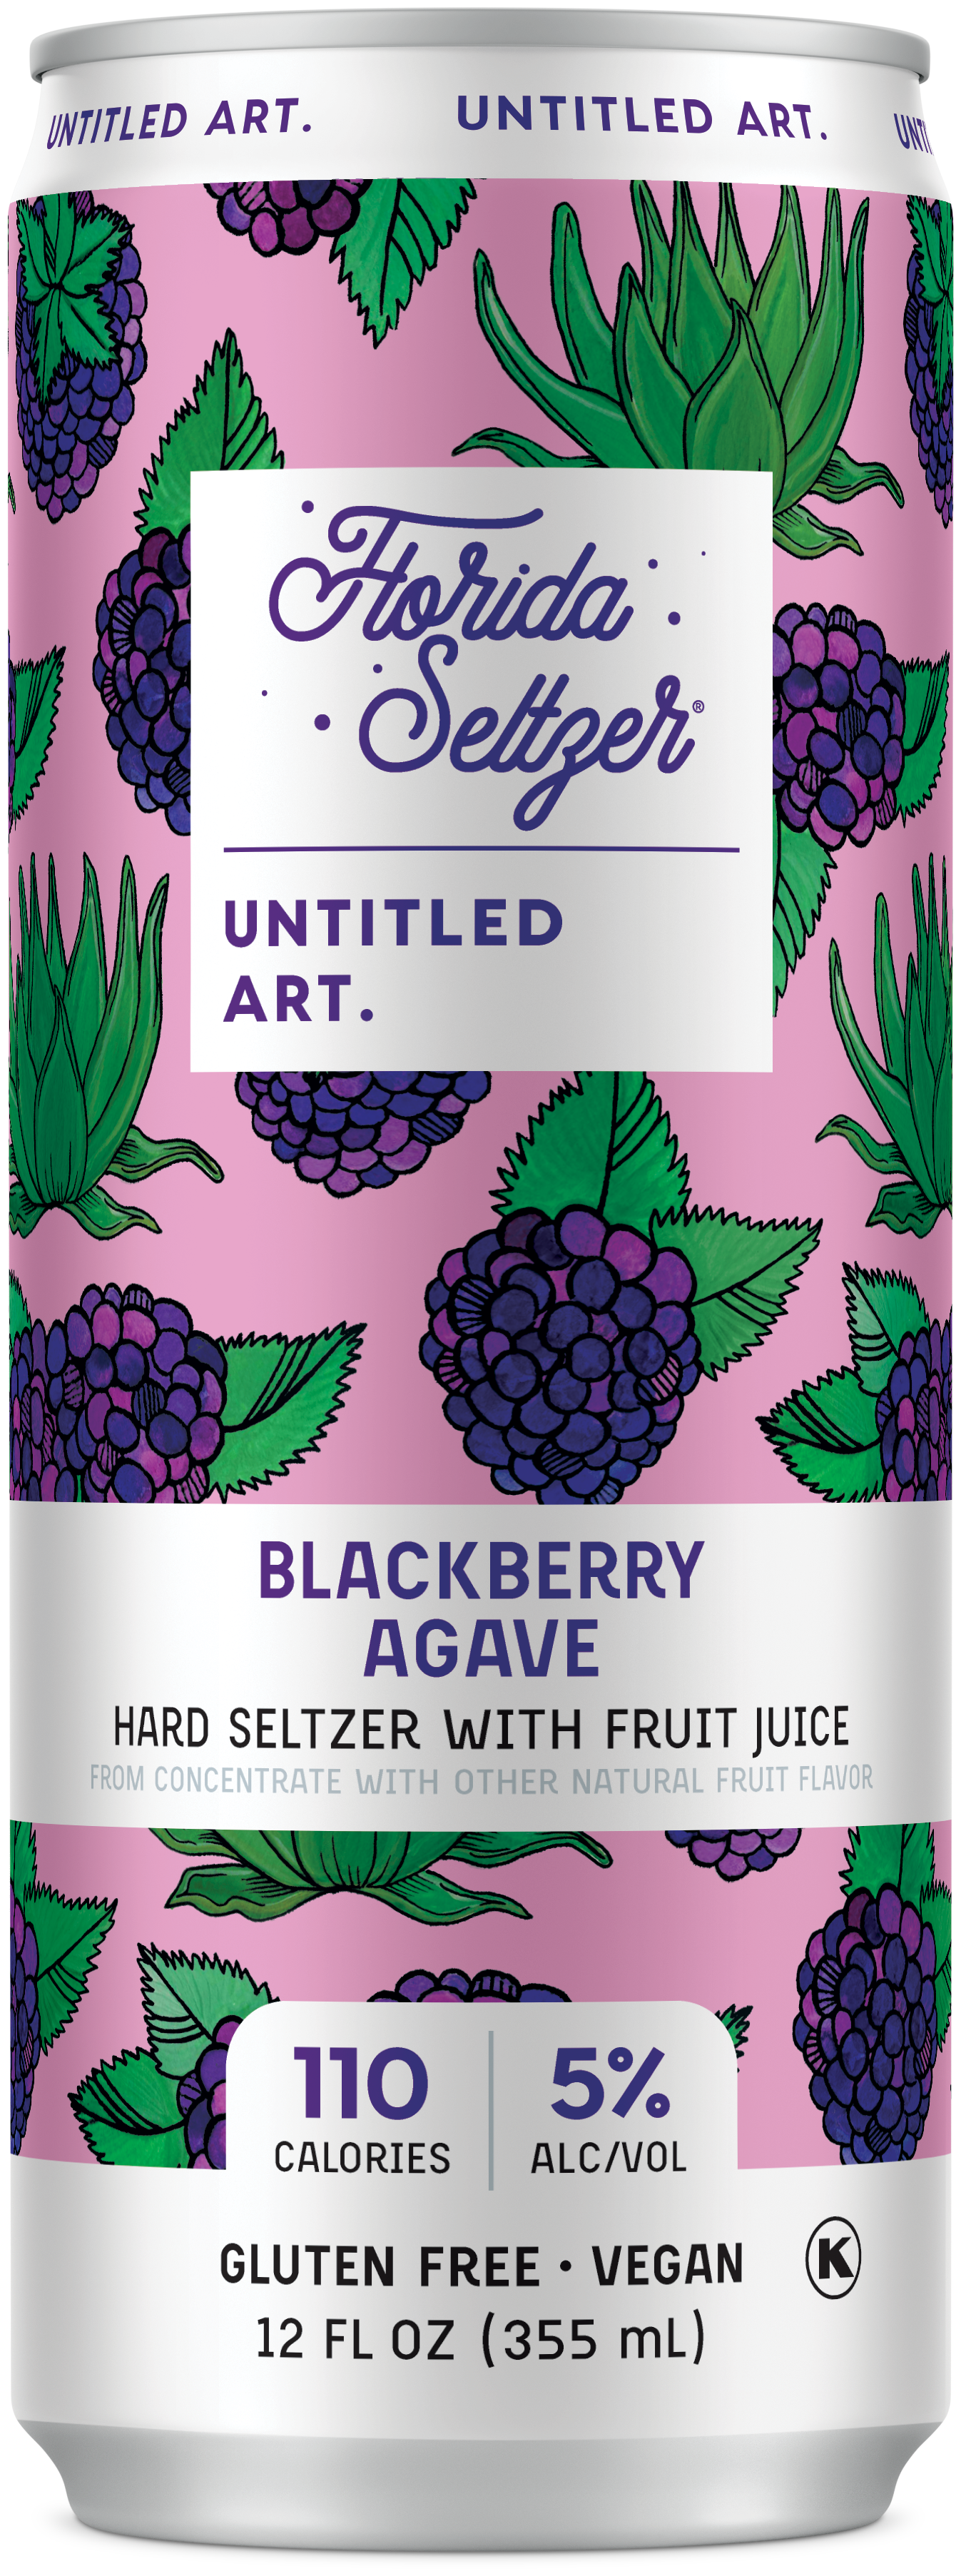 A can of blackberry agave fruit juice.